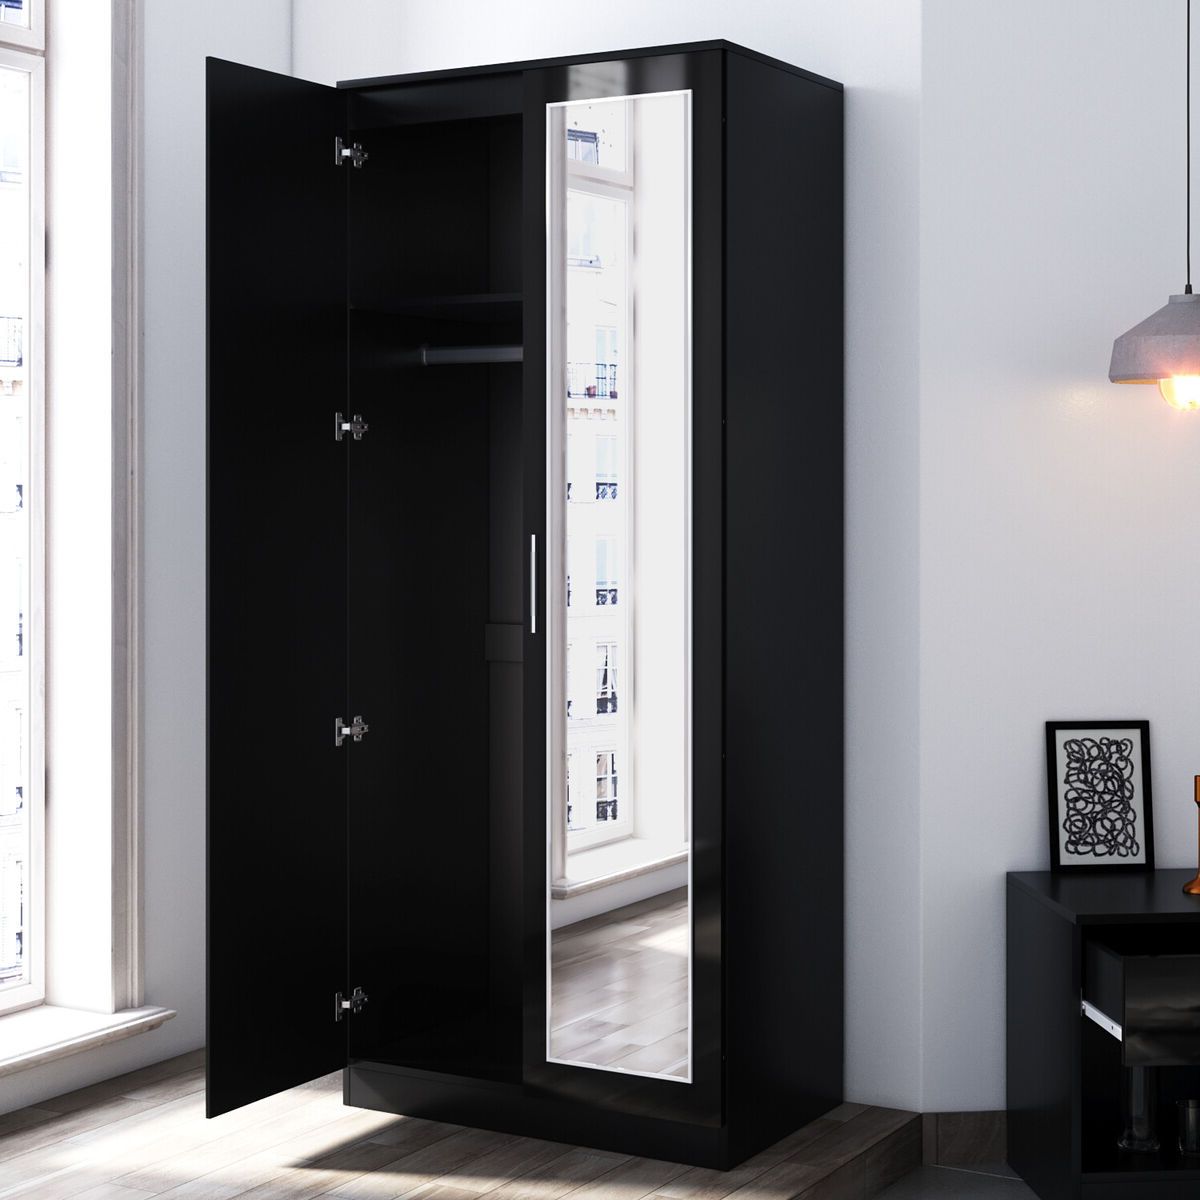 Black High Gloss 2 Doors Wardrobe Bedroom Furniture Storage With Hanging  Rail | Ebay Intended For Double Black Covered Tidy Rail Wardrobes (View 6 of 20)